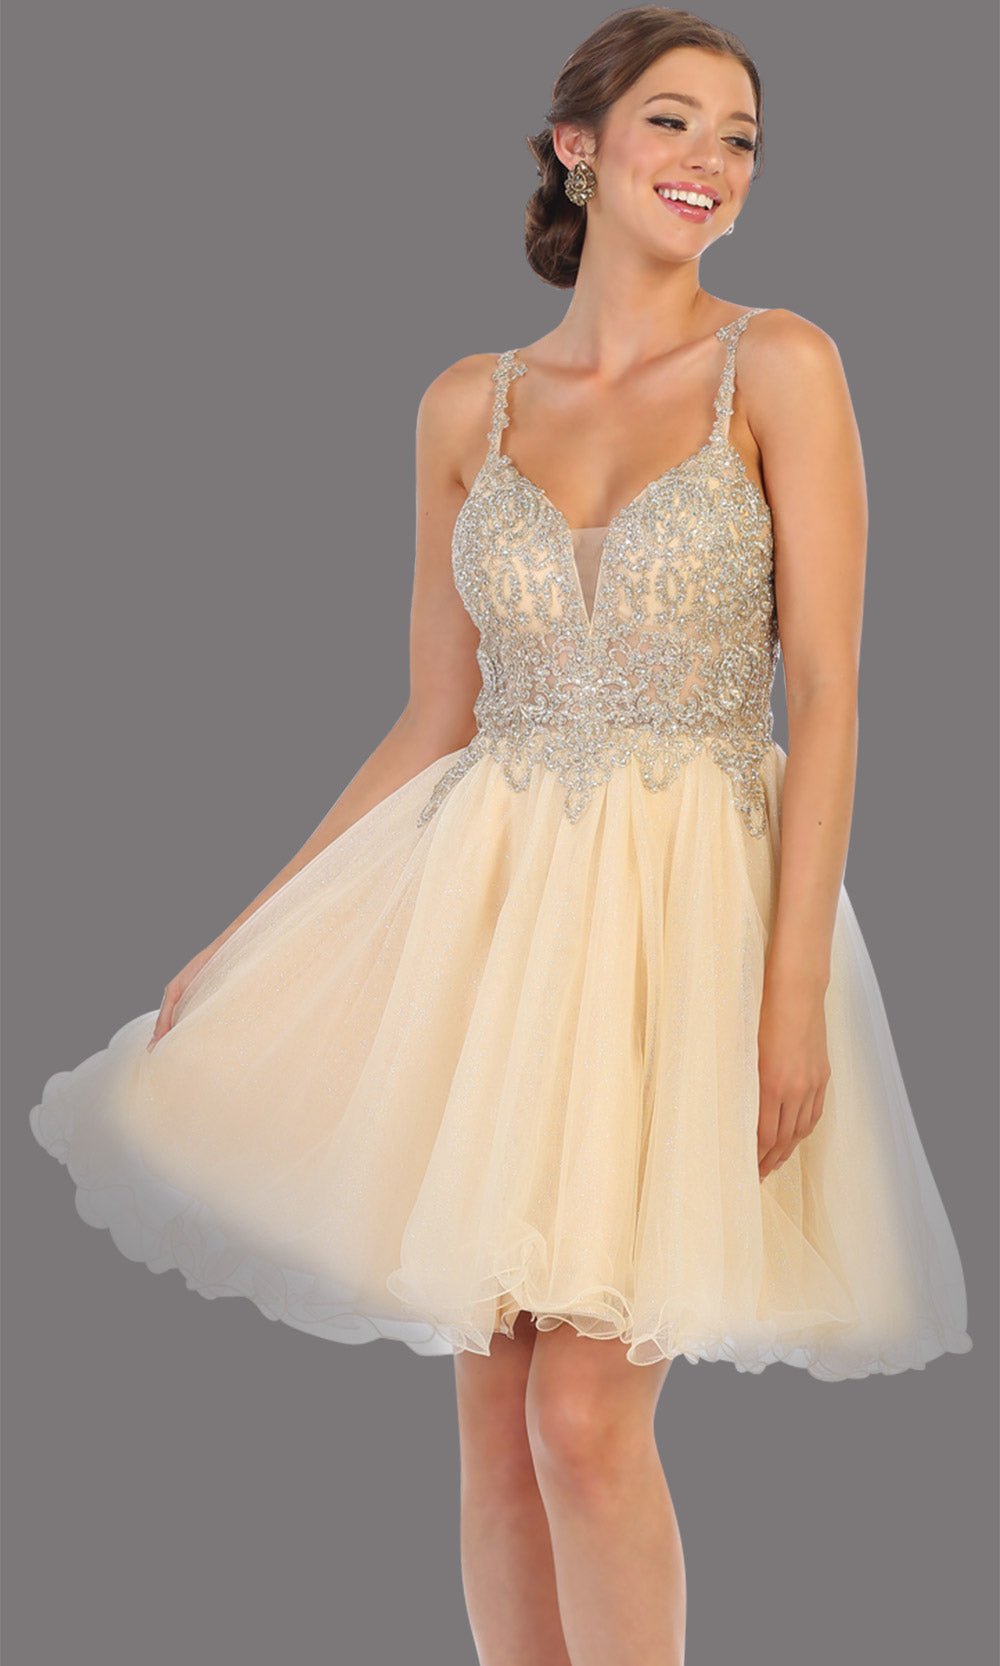 Mayqueen Mq1693 short champagne gold flowy v neck beaded sequin grade 8 graduation dress w/straps & puffy skirt. This light gold party dress is perfect for prom, graduation, grade 8 grad, confirmation dress, bat mitzvah dress, damas. Plus sizes avail.jpg